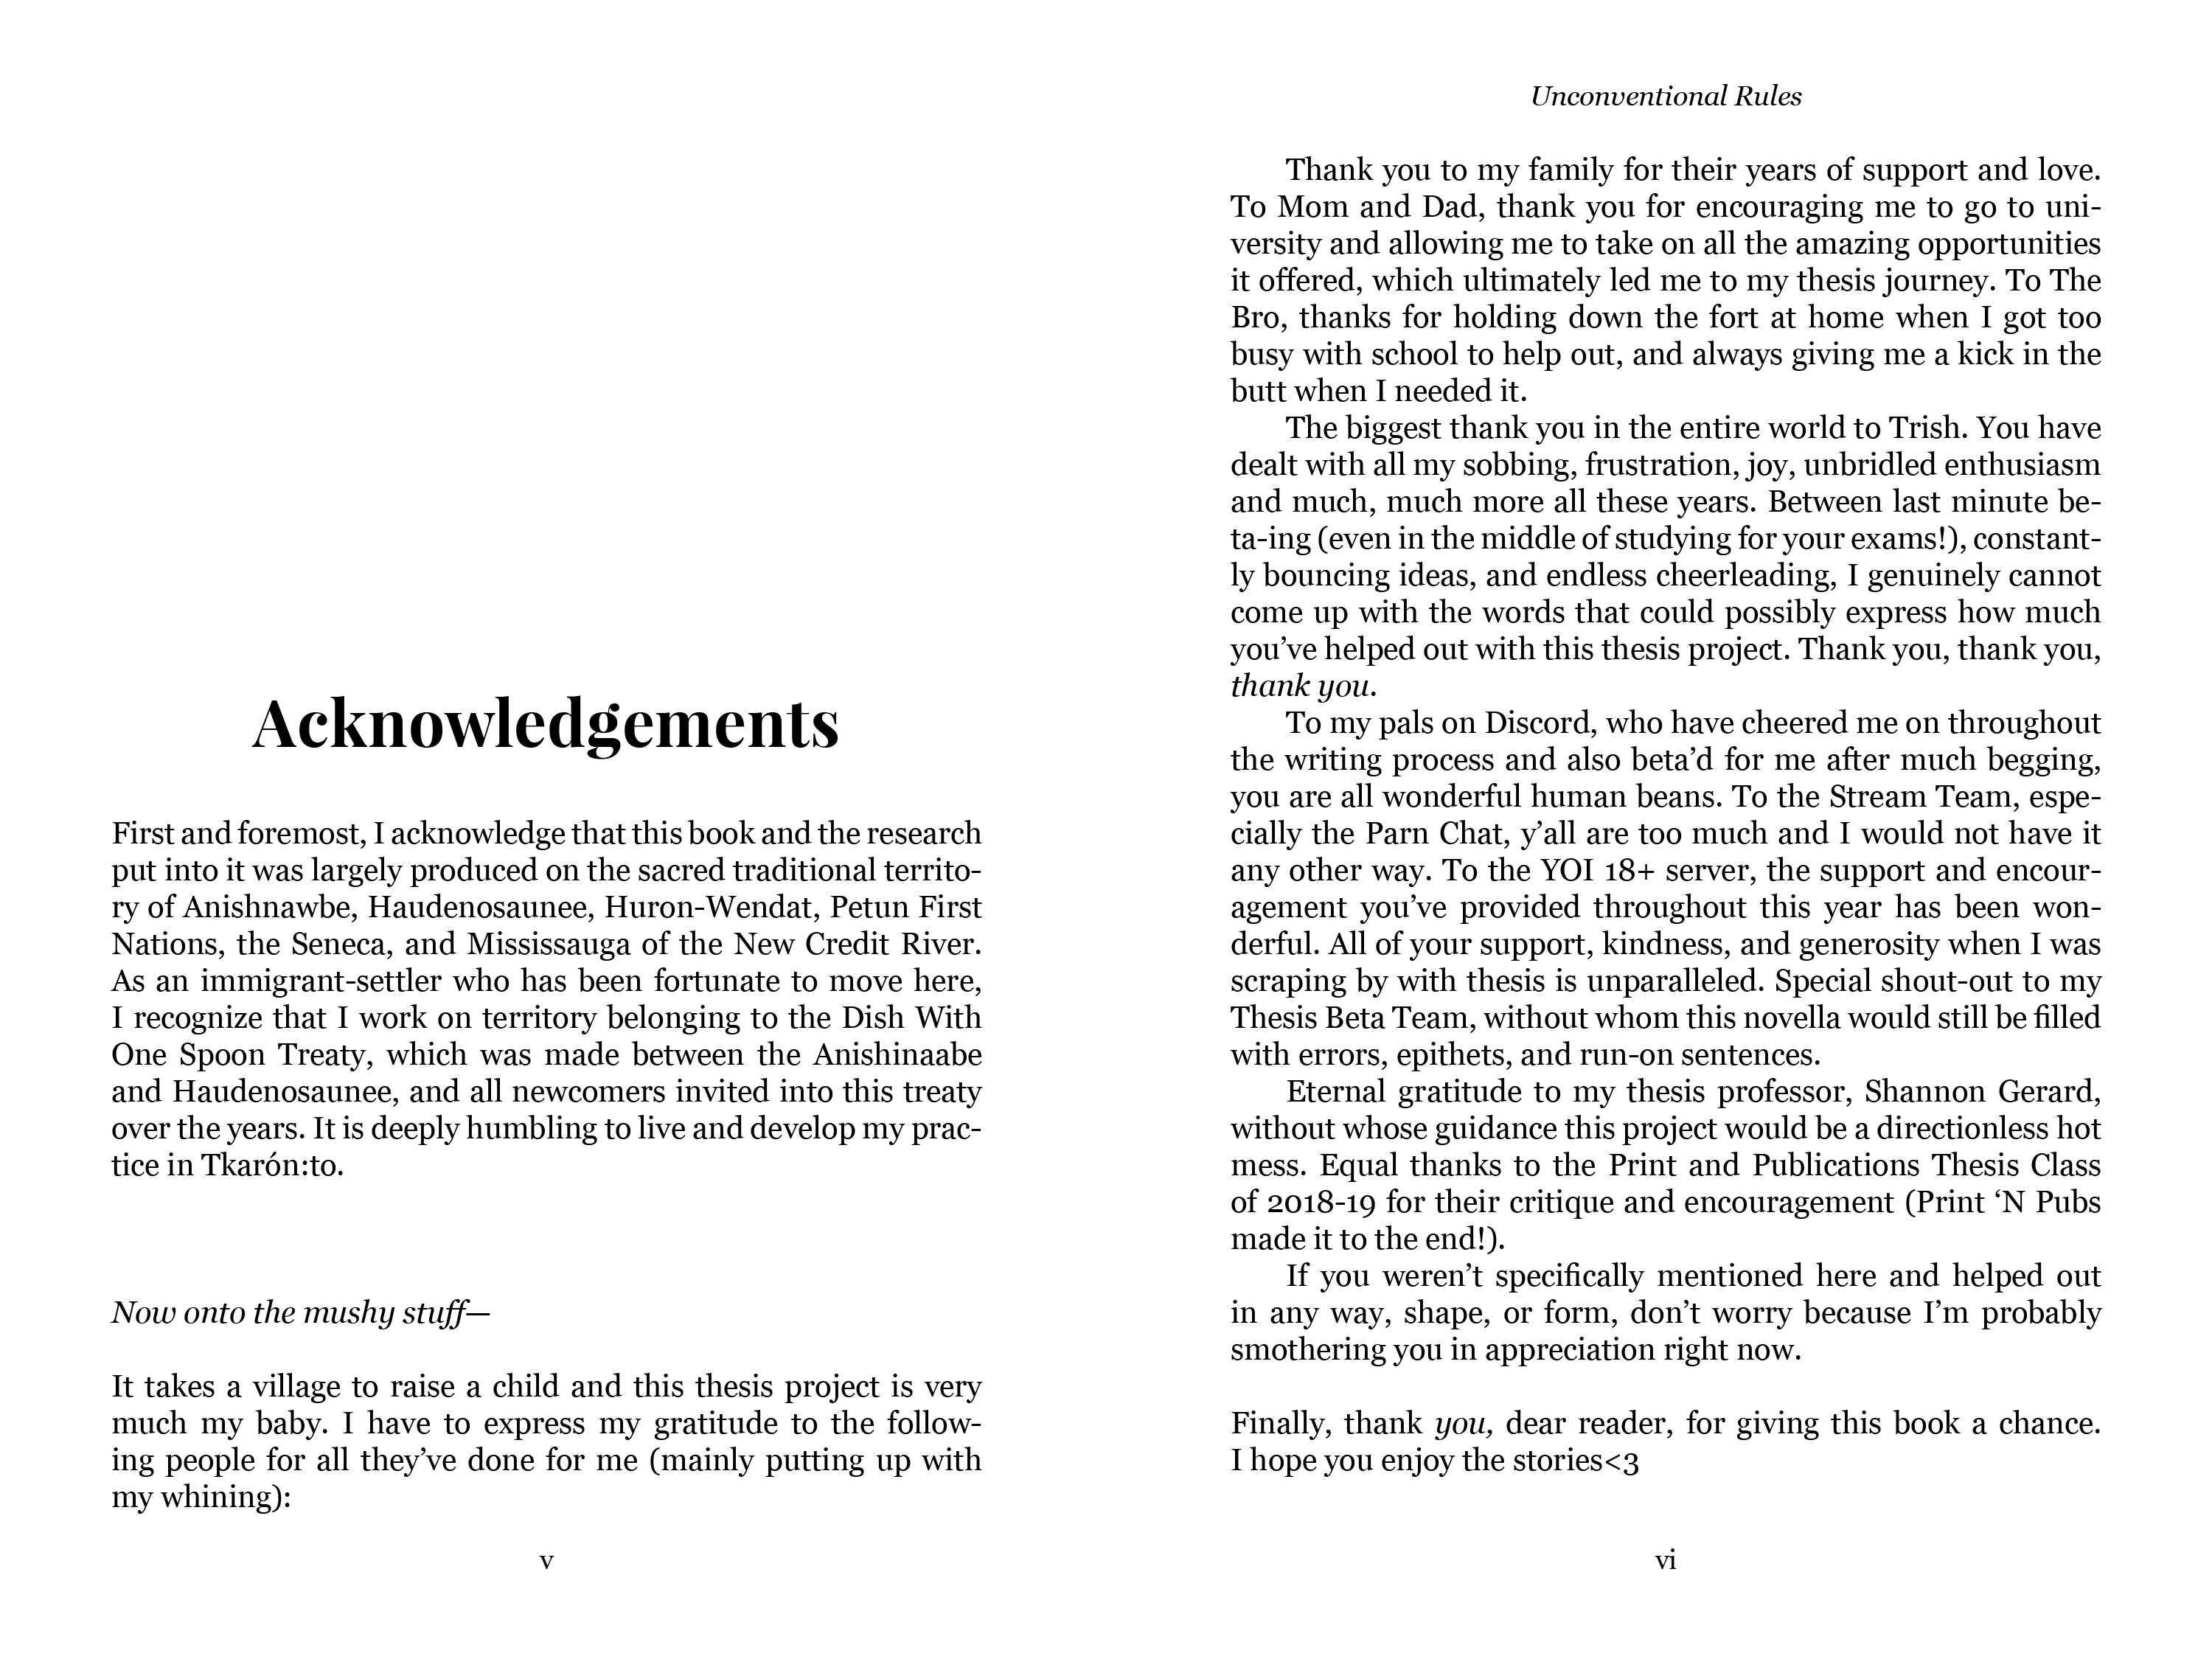 A digital version of the Acknowledgements pages.